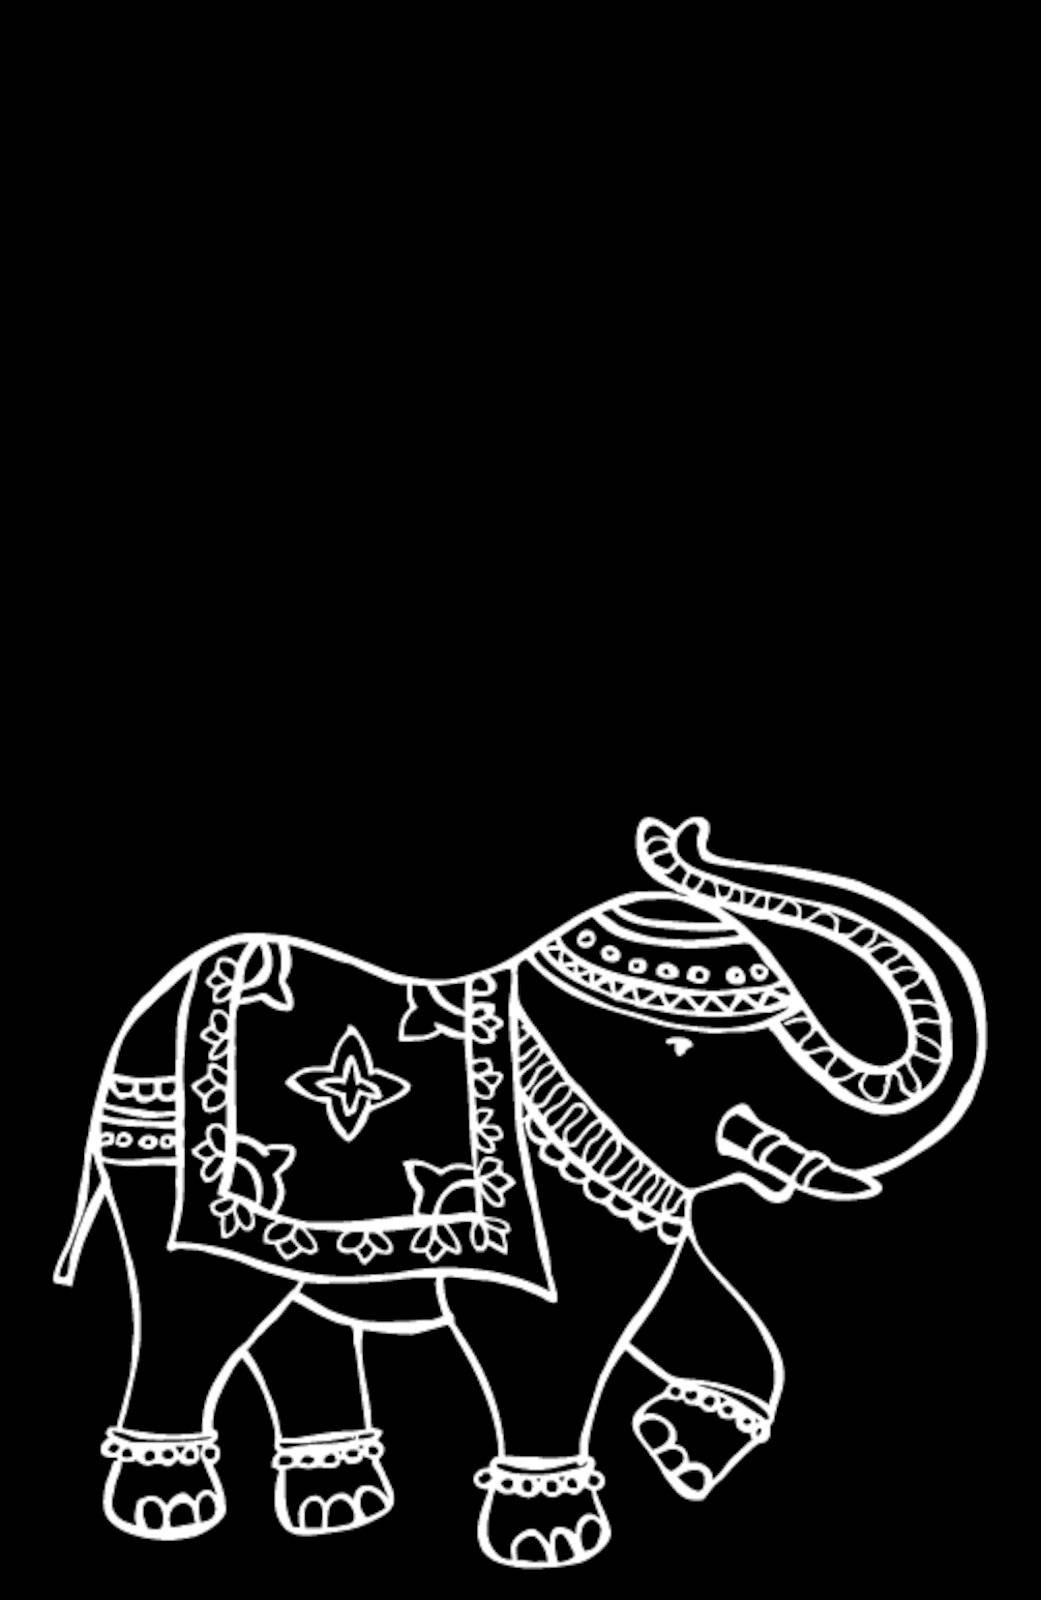 Traditional indian elephant decorated for special occasion black and white background. Vector file available.